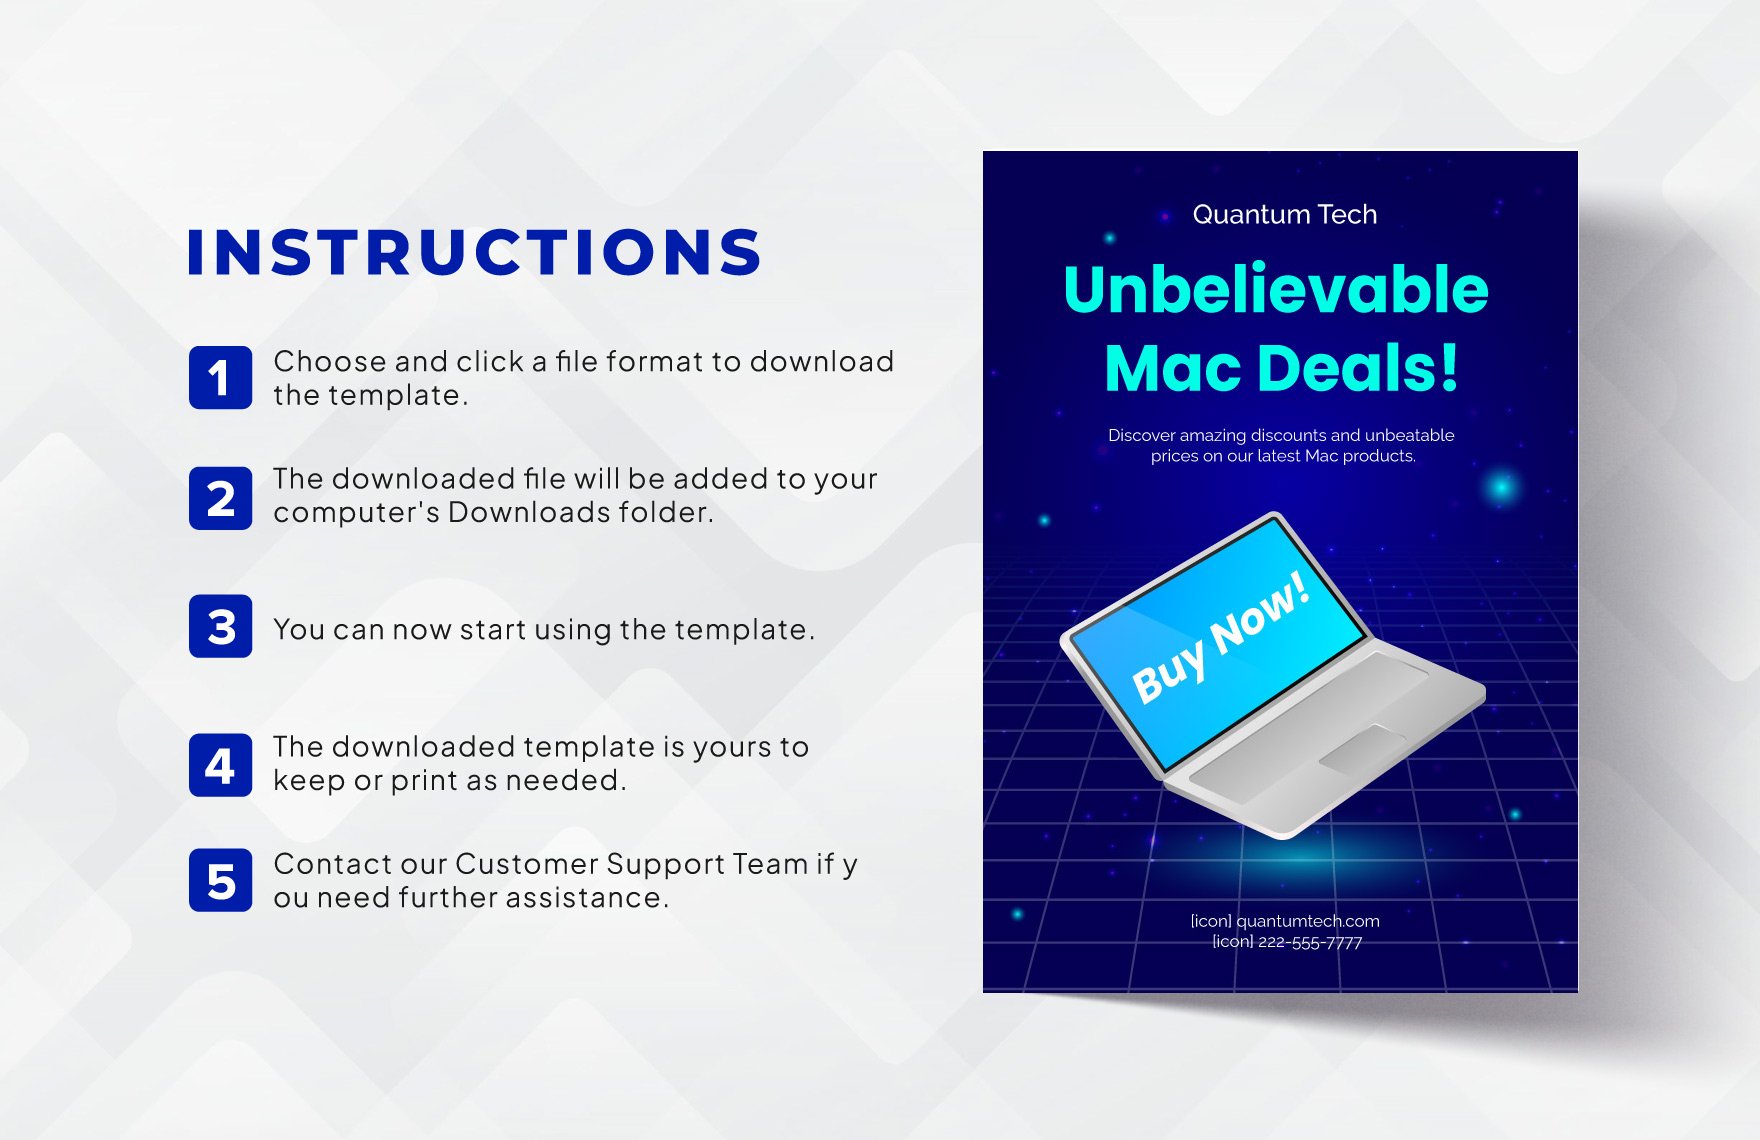 Flyer for Mac Template